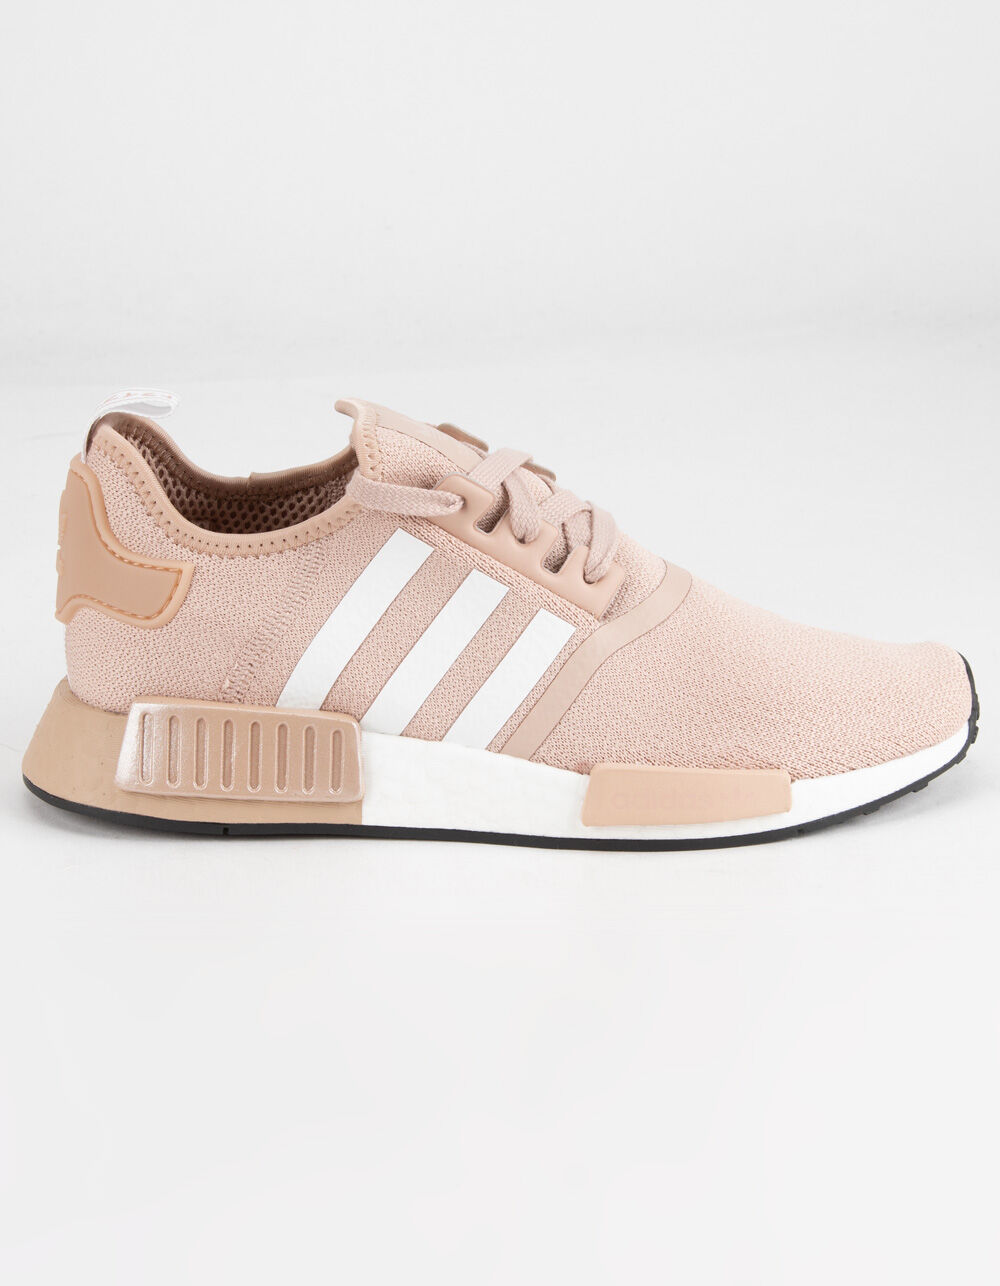 ADIDAS NMD_R1 Nude Shoes NUDE |